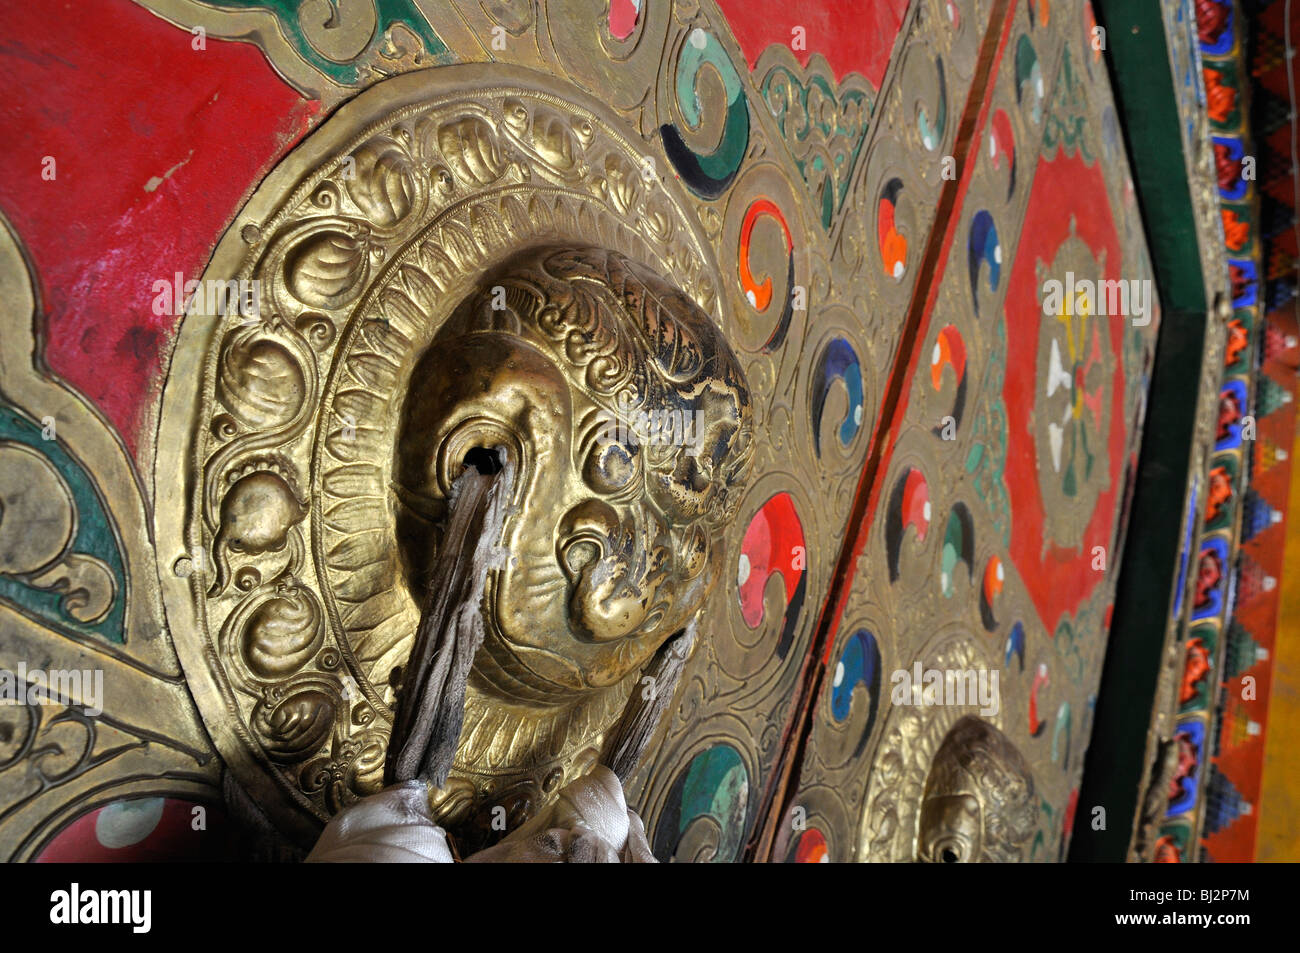 Ornate Door Detail From a Tibetan Buddhist Temple Stock Photo